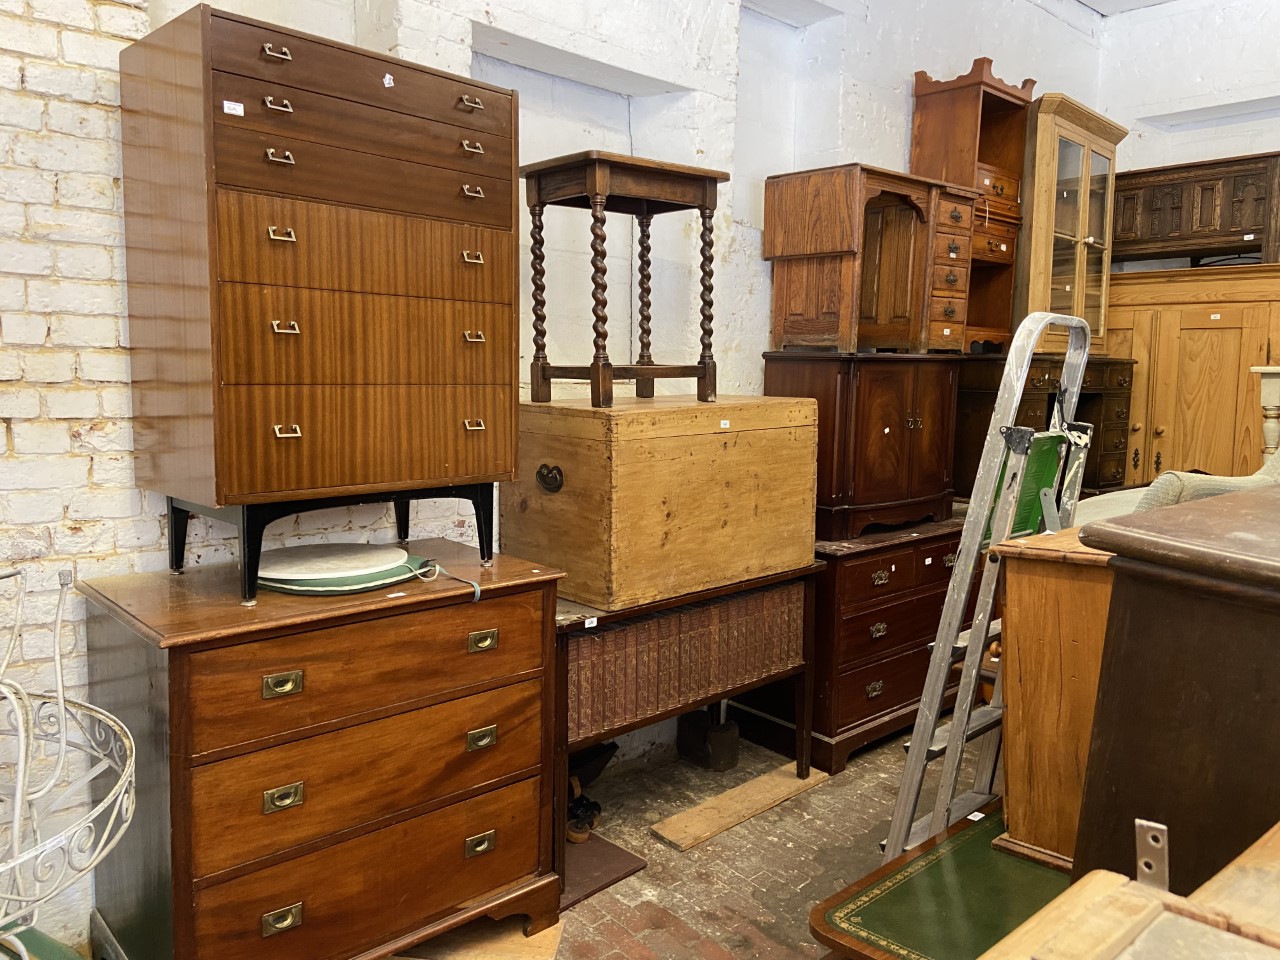 Buying second-hand furniture can help you reduce your carbon impact